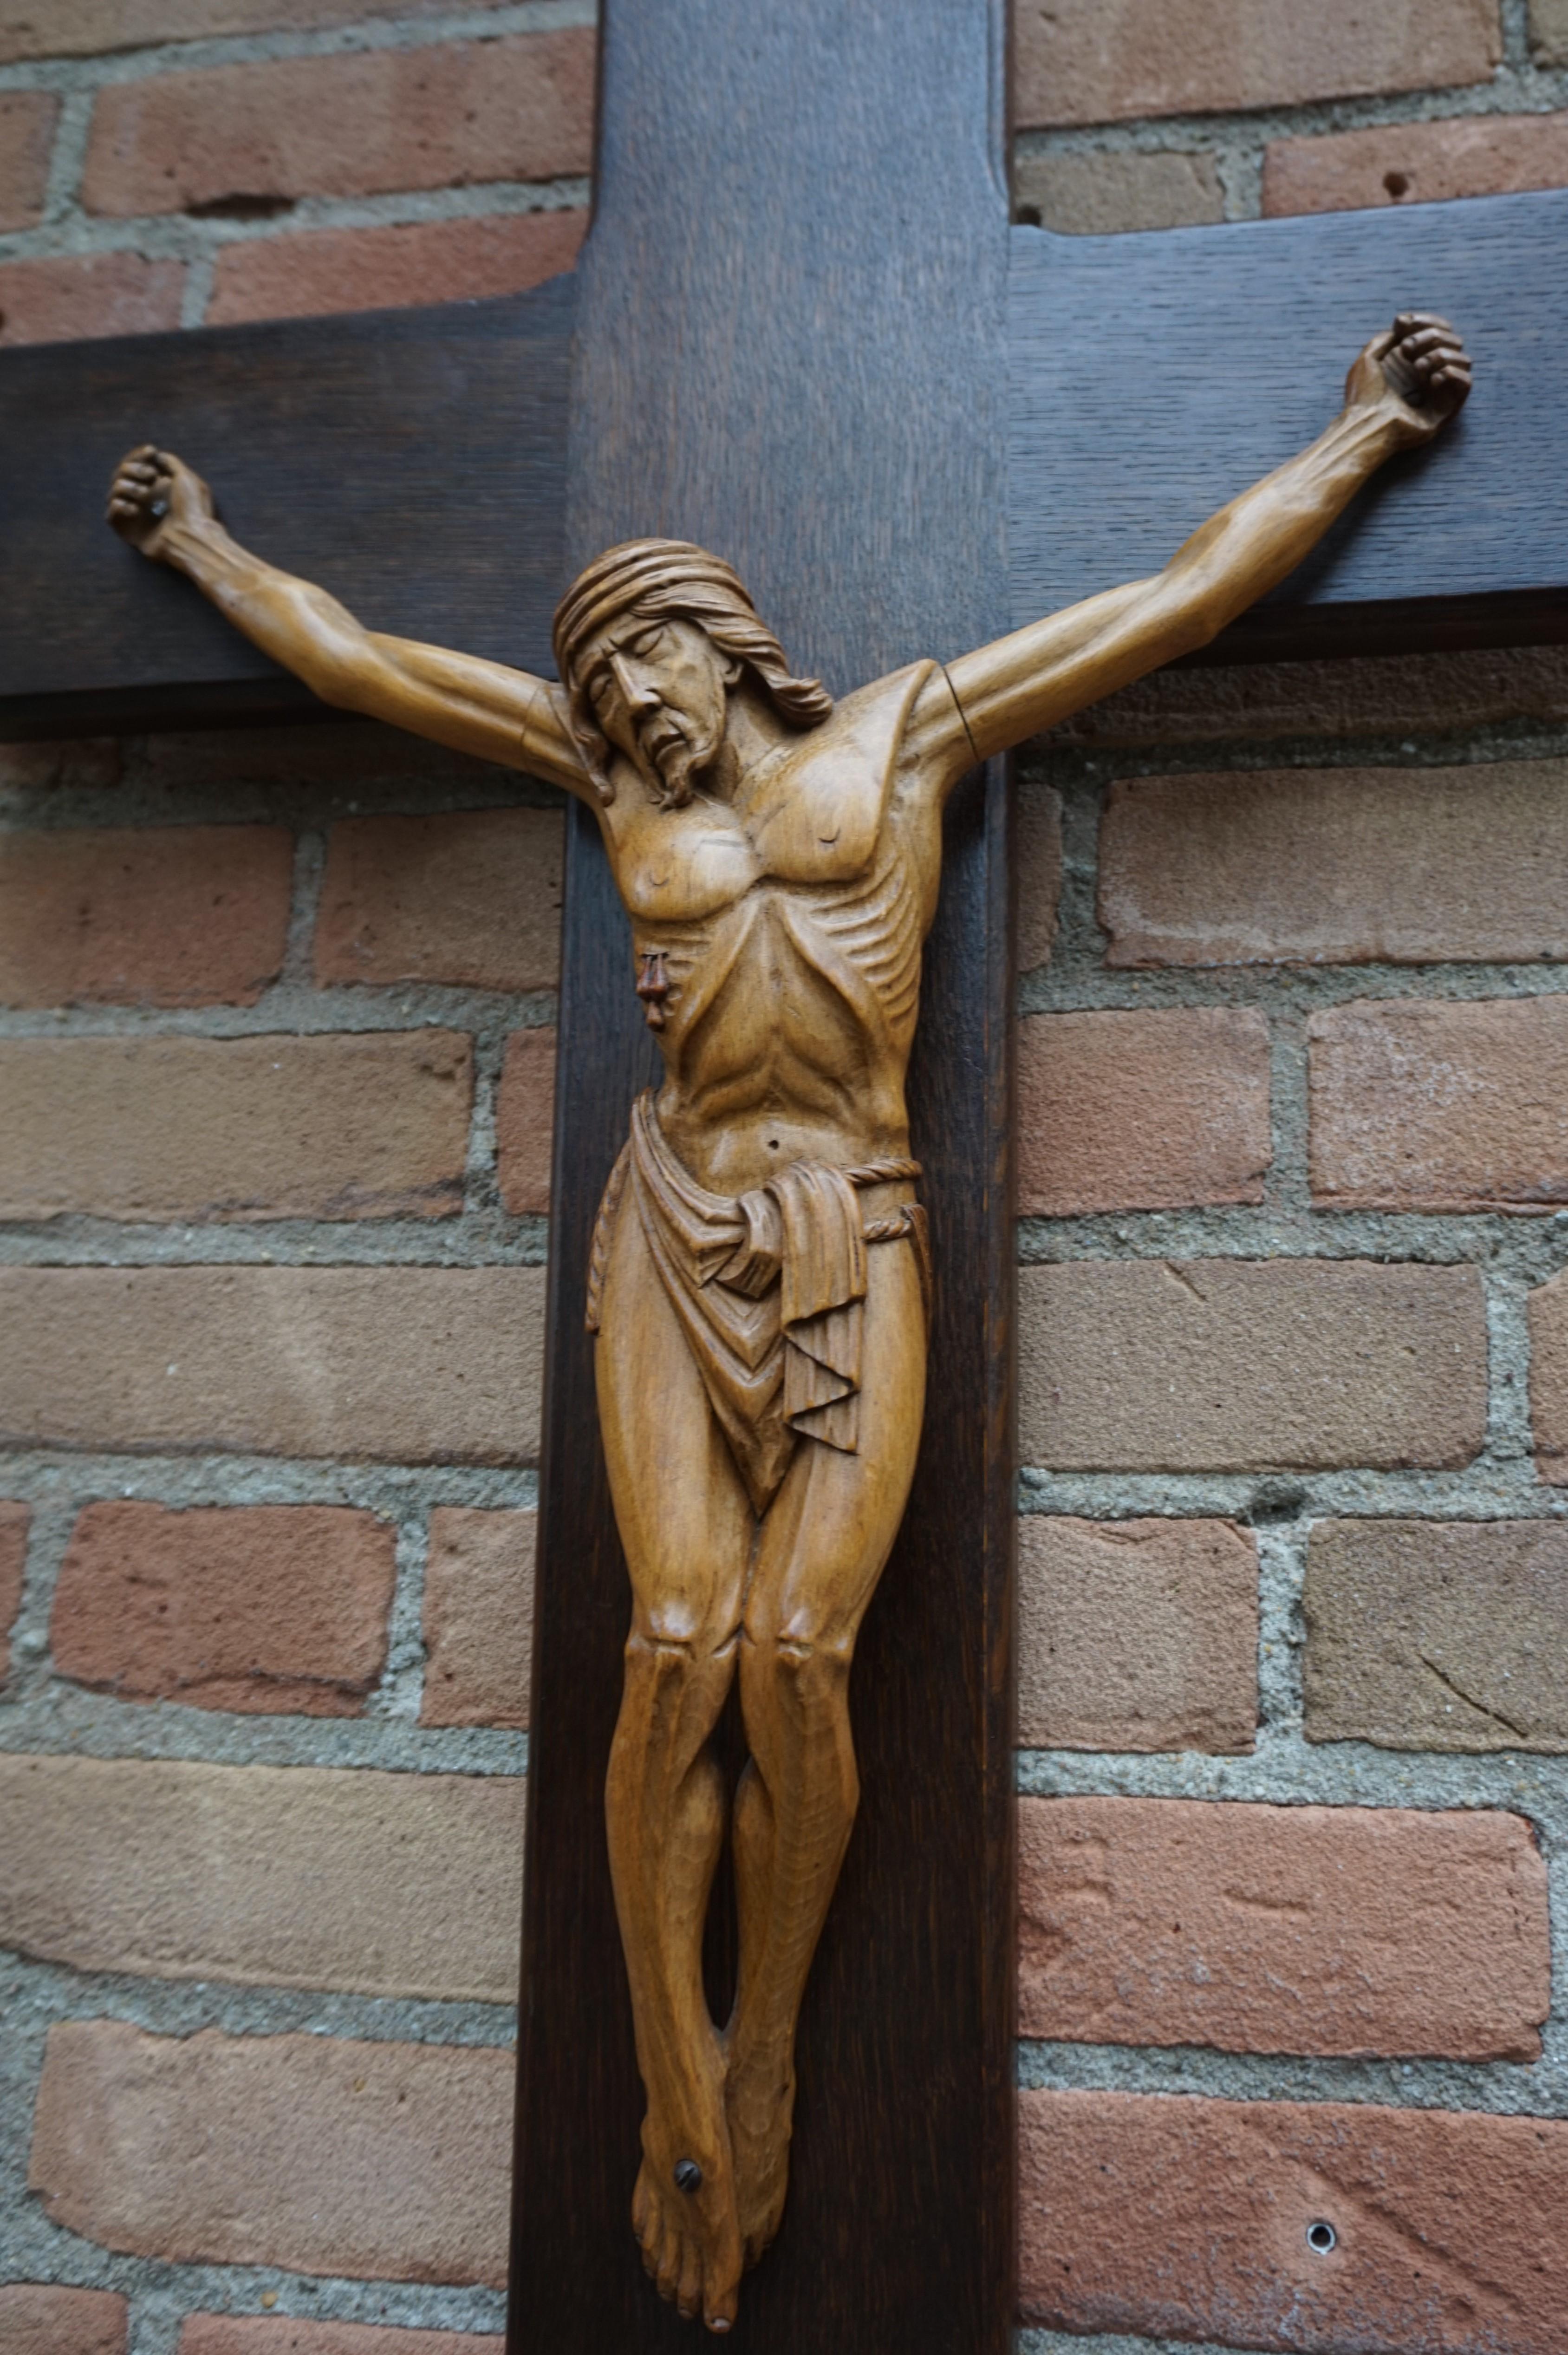 Art Deco Good Size and Hand Carved Mid to Early 20th Century Corpus of Christ or Crucifix